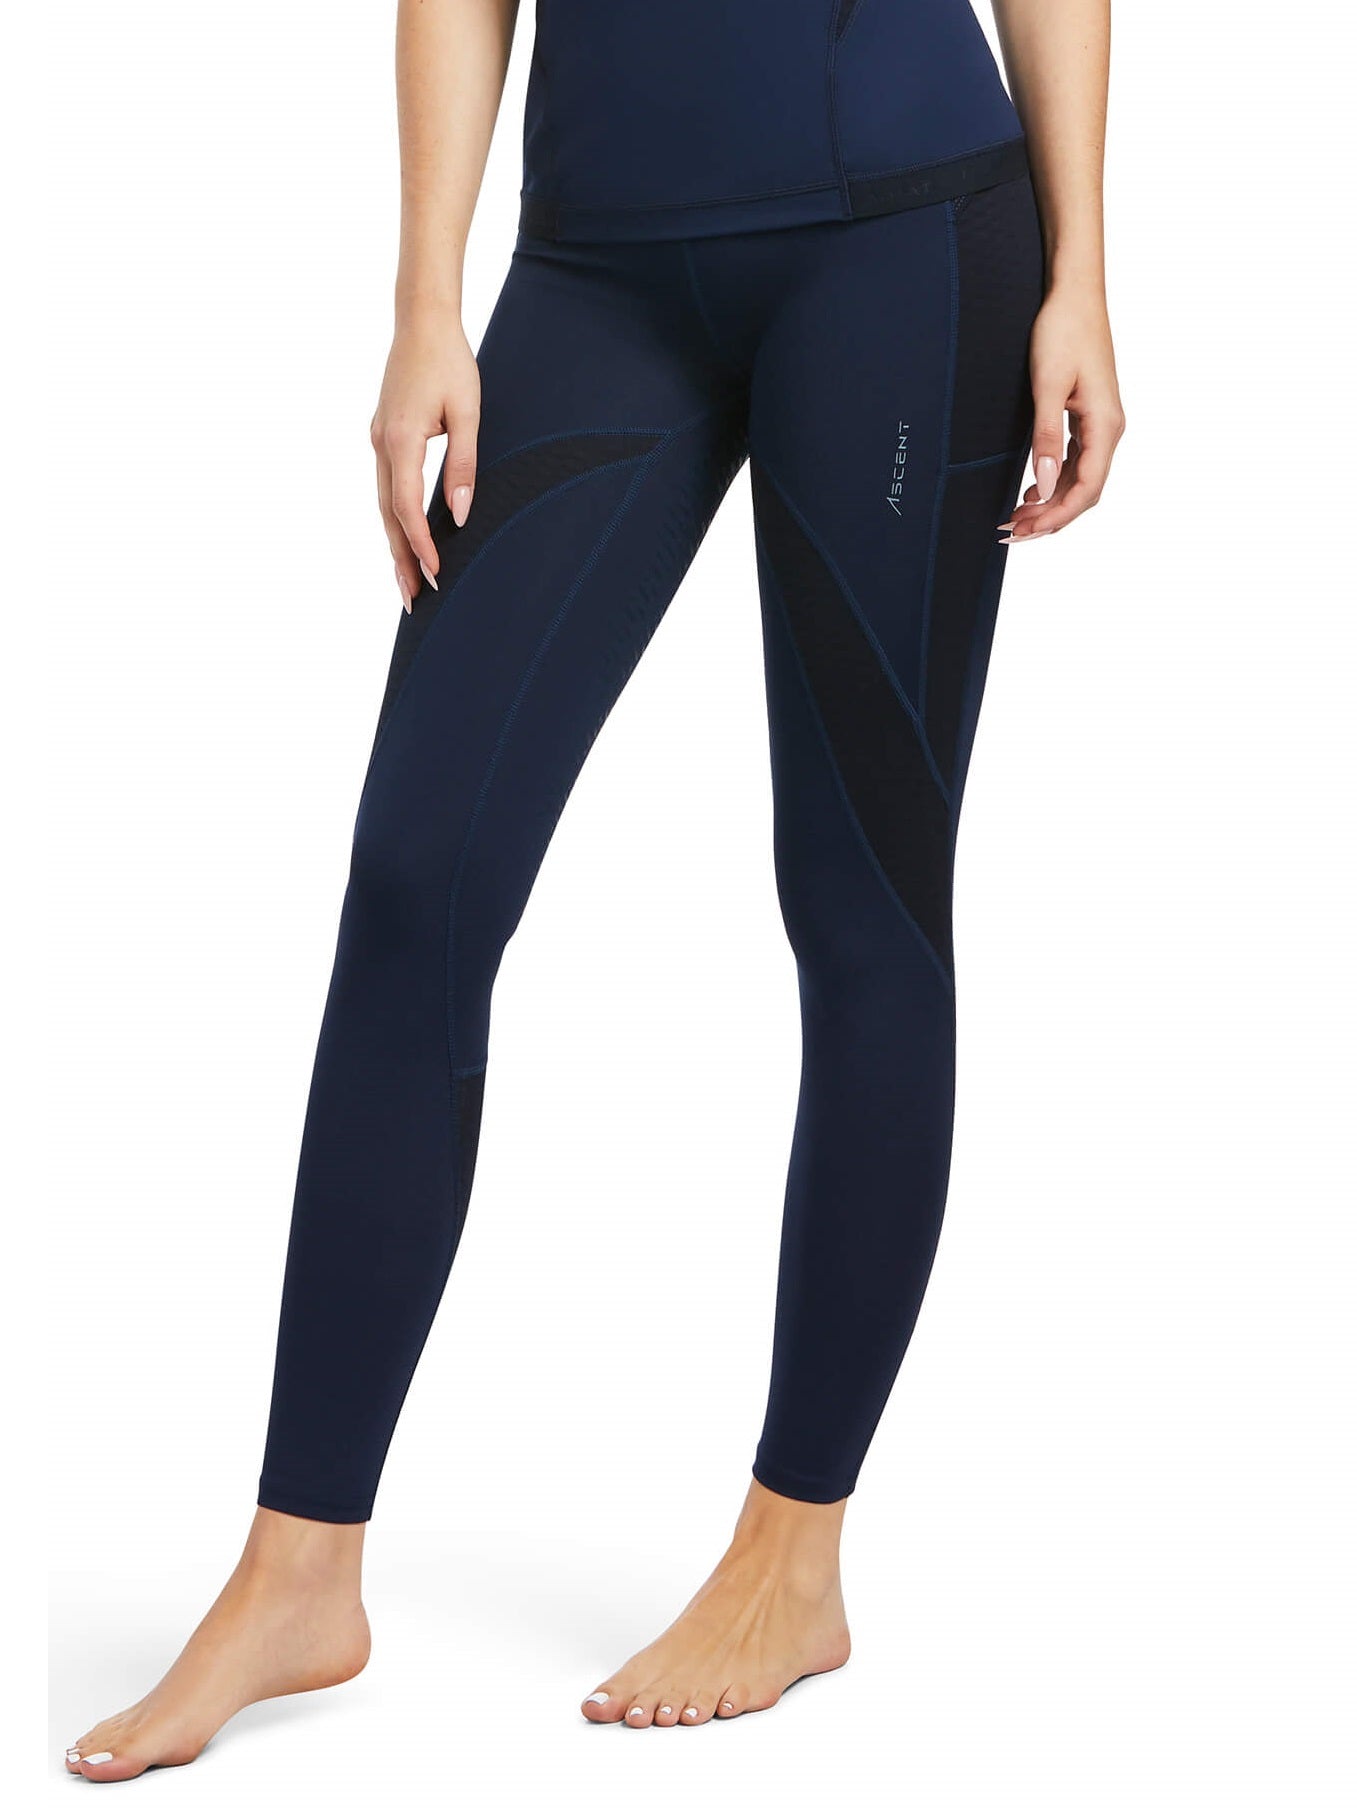 40% OFF ARIAT Ascent Half Grip Riding Tights - Womens - Navy - Size: XS & LARGE